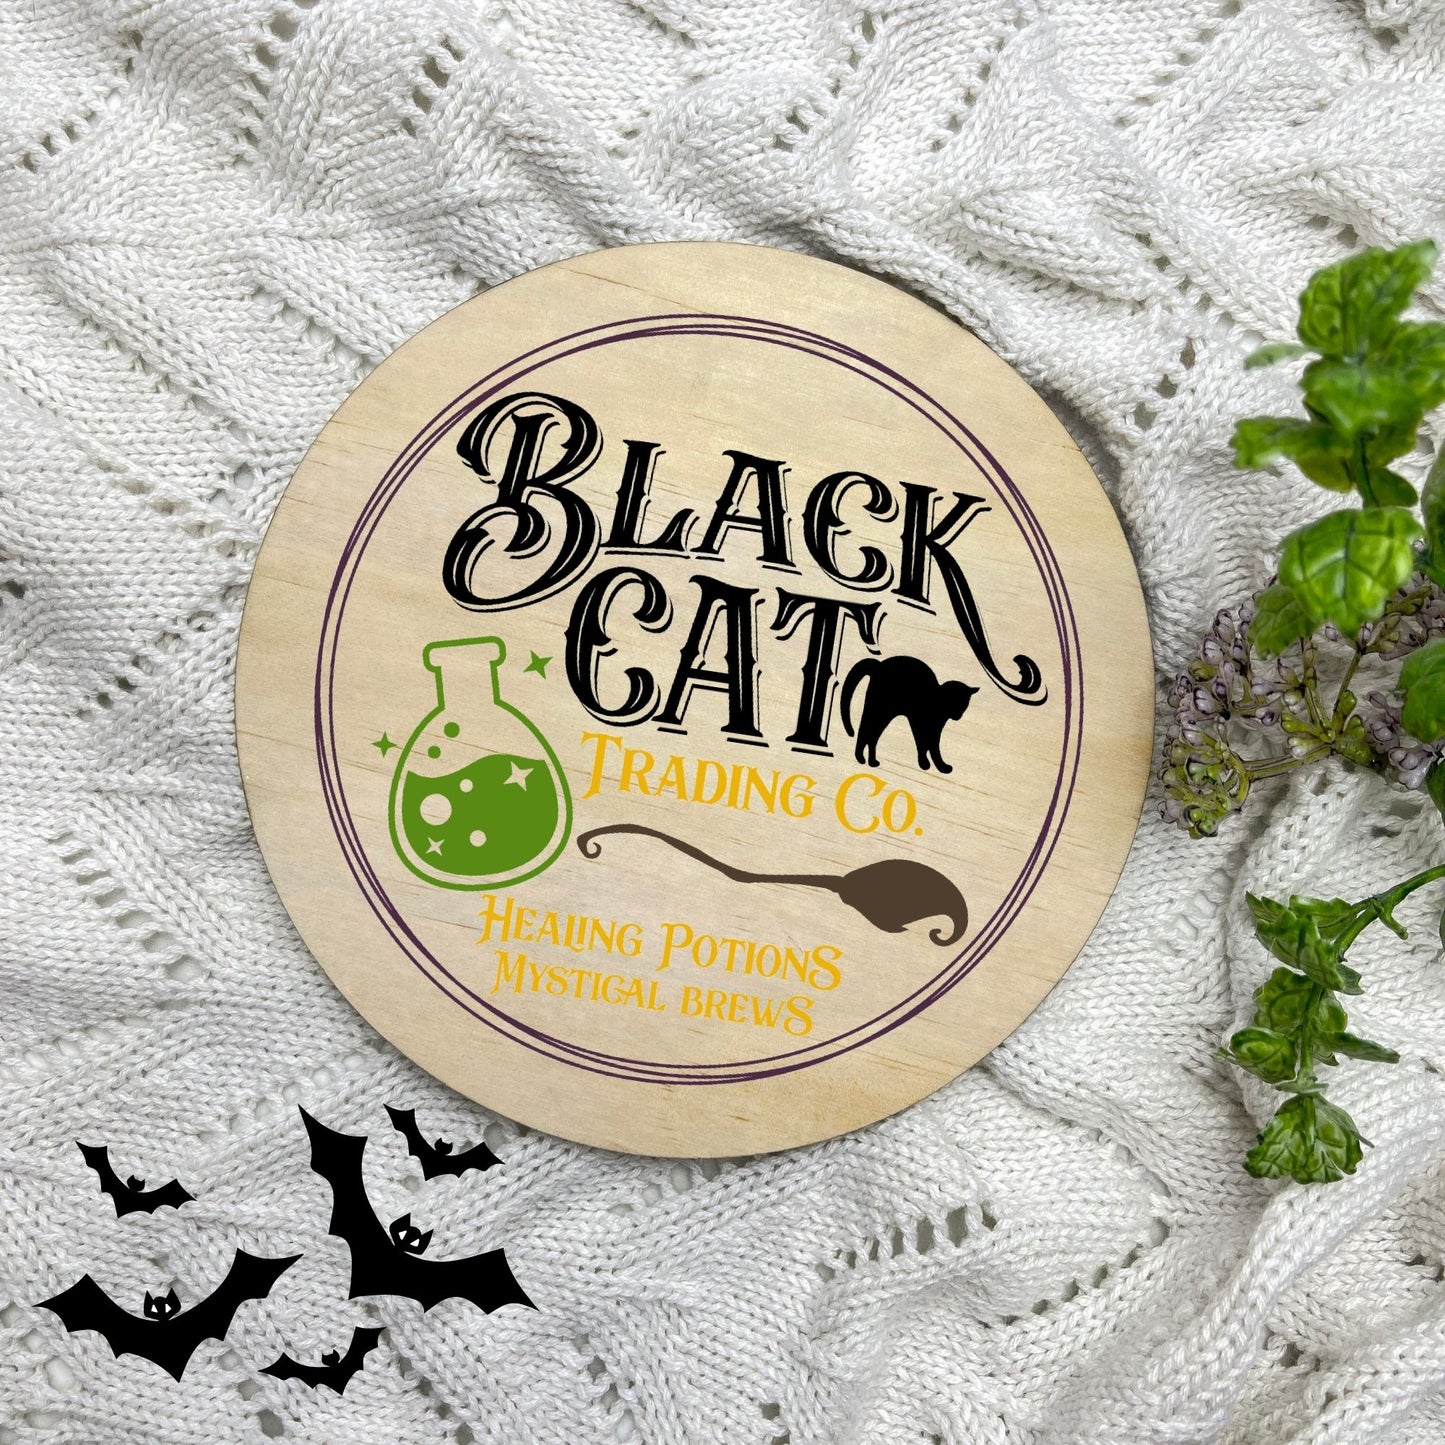 Black cat trading co sign, Halloween Decor, Spooky Vibes, hocus pocus sign, trick or treat decor, haunted house h31